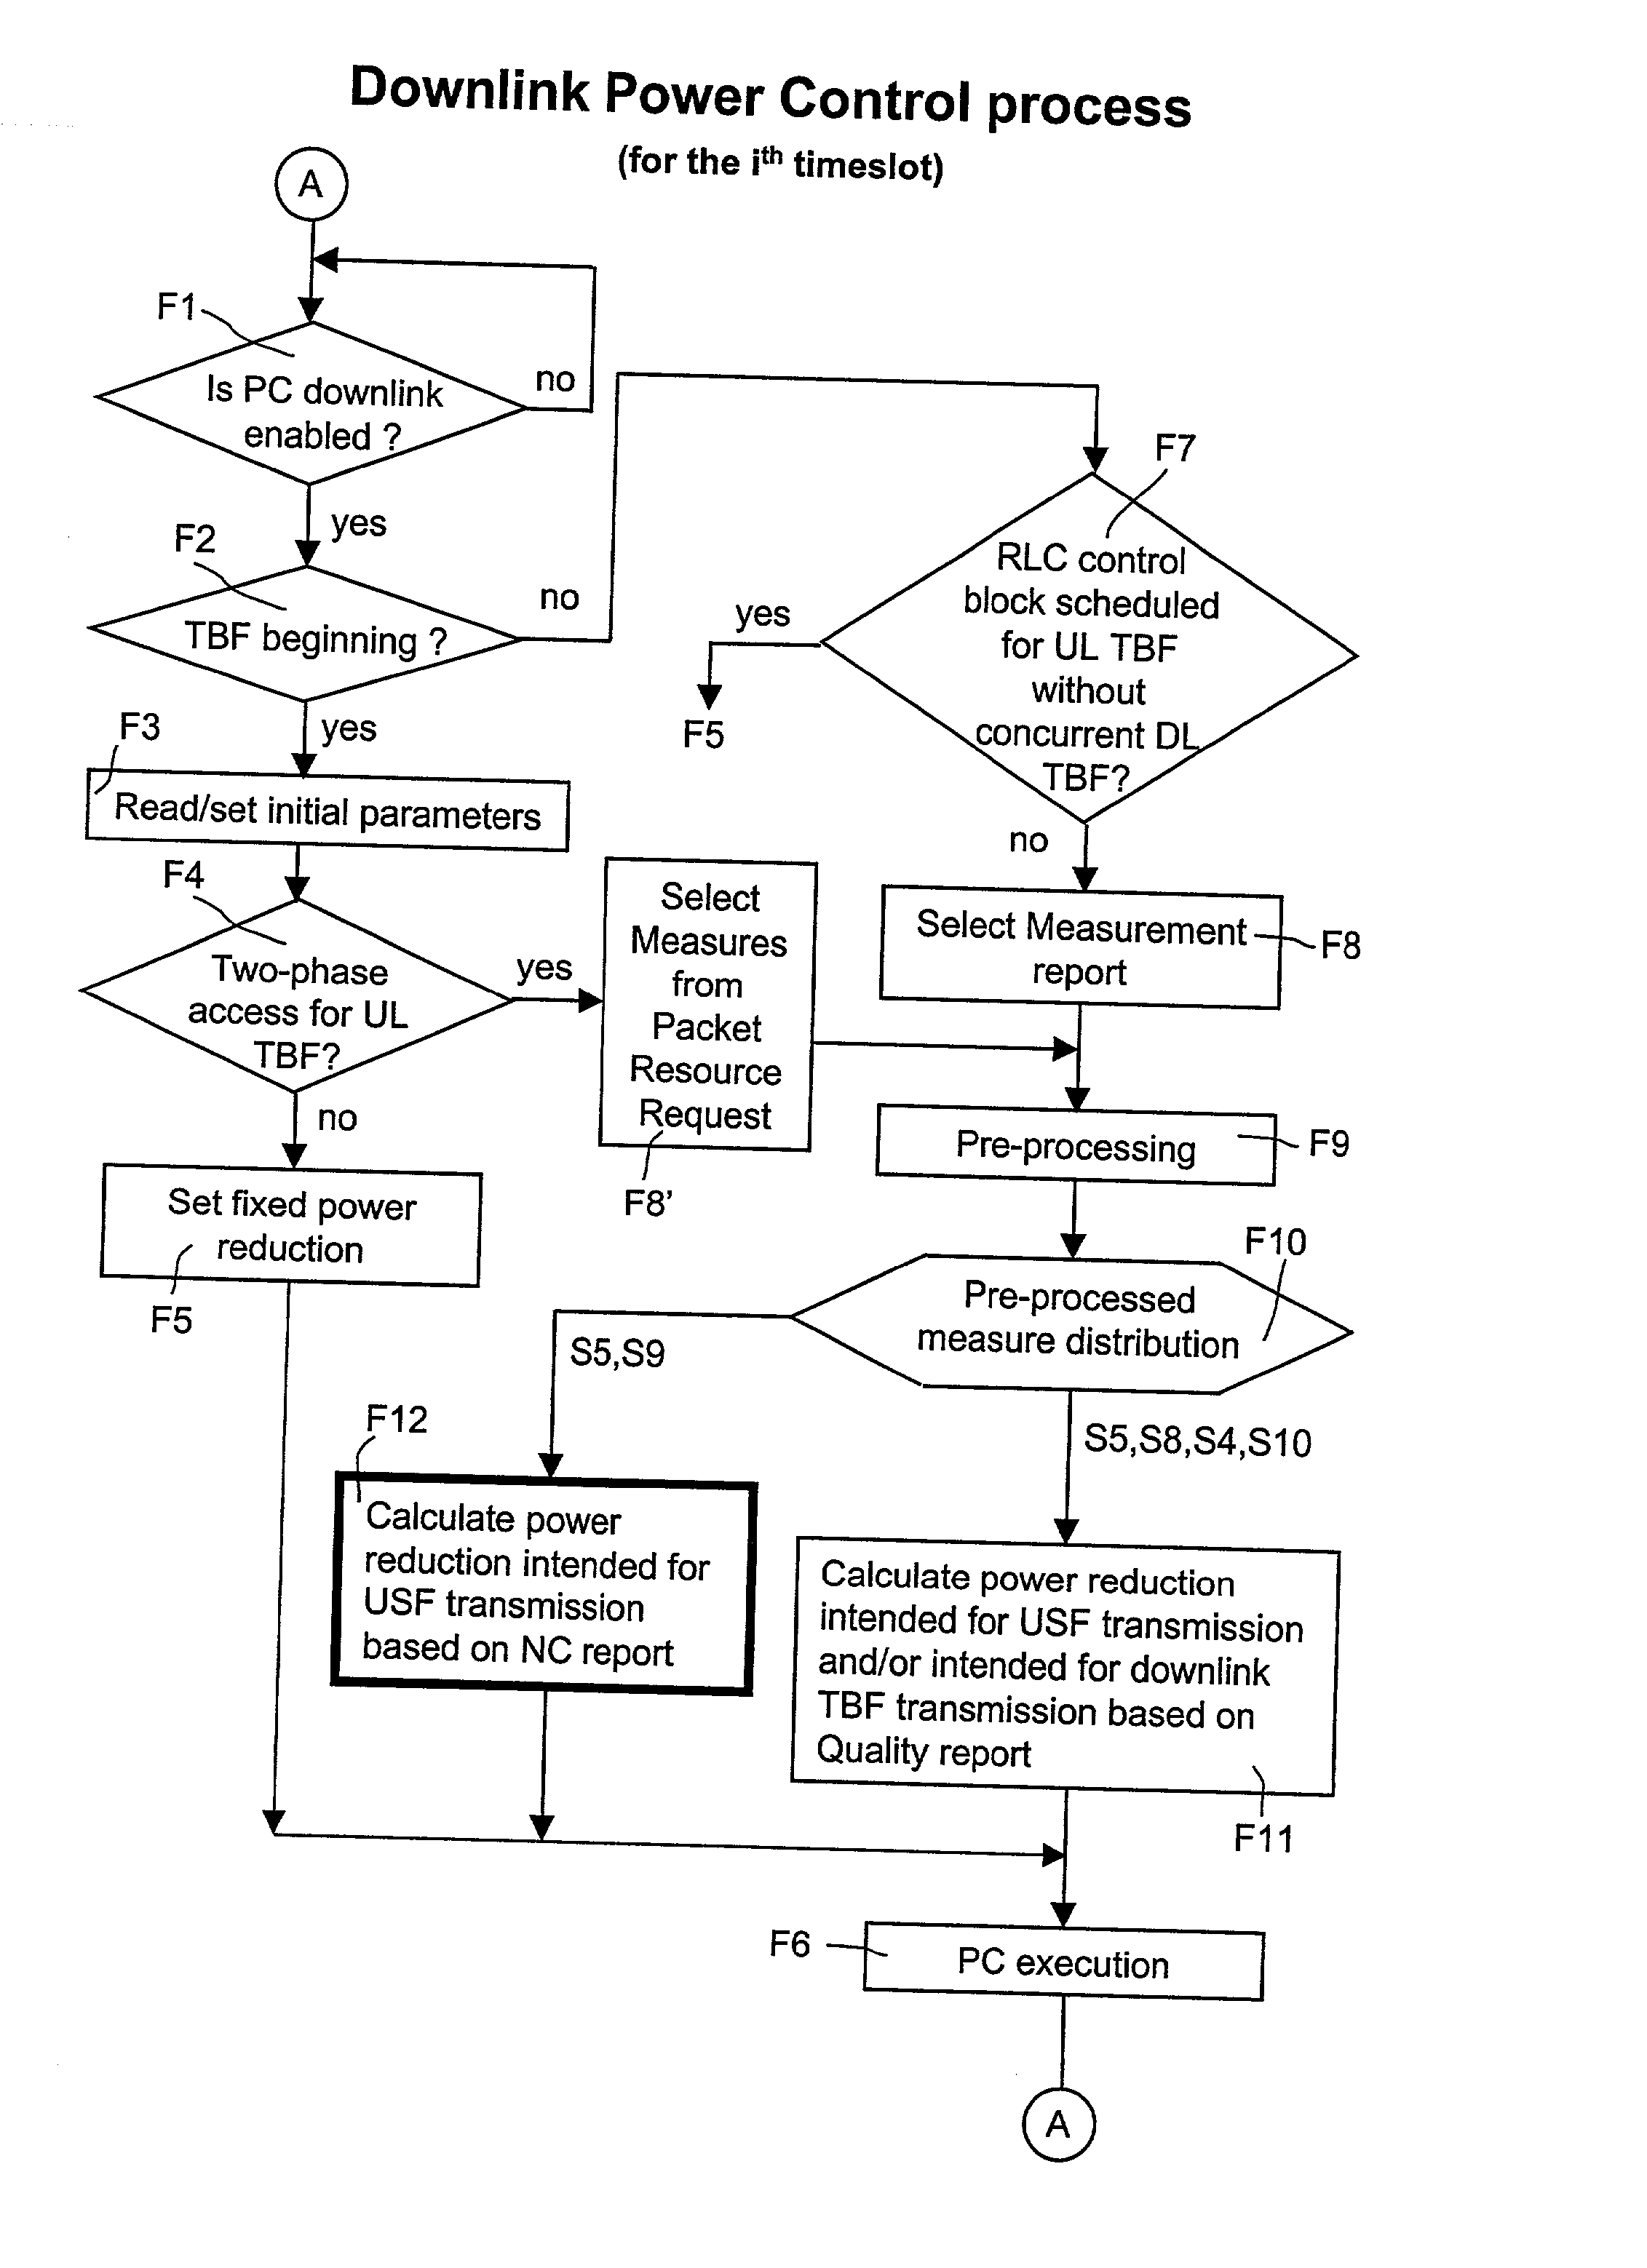 Method to perform downlink power control in packet switching cellular systems with dynamic allocation of the RF channel